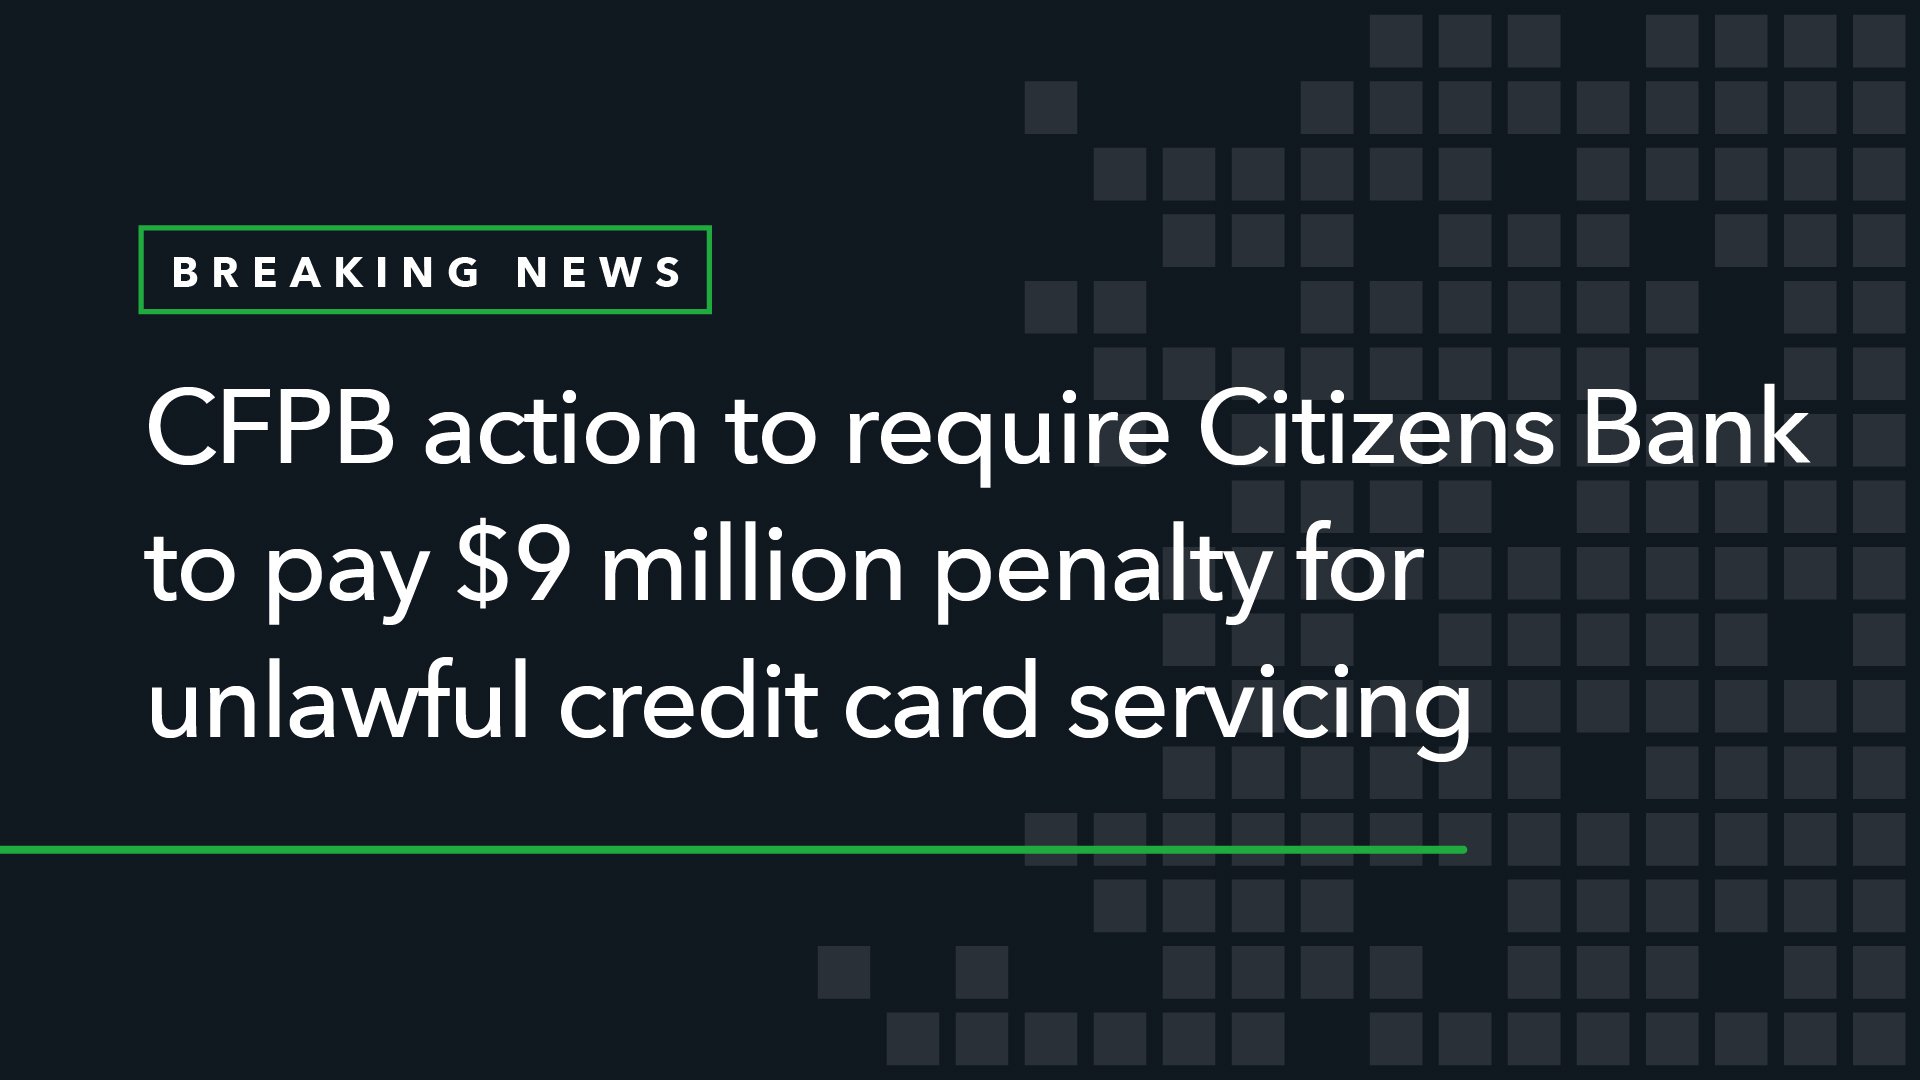 CFPB Action to Require Citizens Bank to Pay  Million Penalty for Unlawful Credit Card Servicing